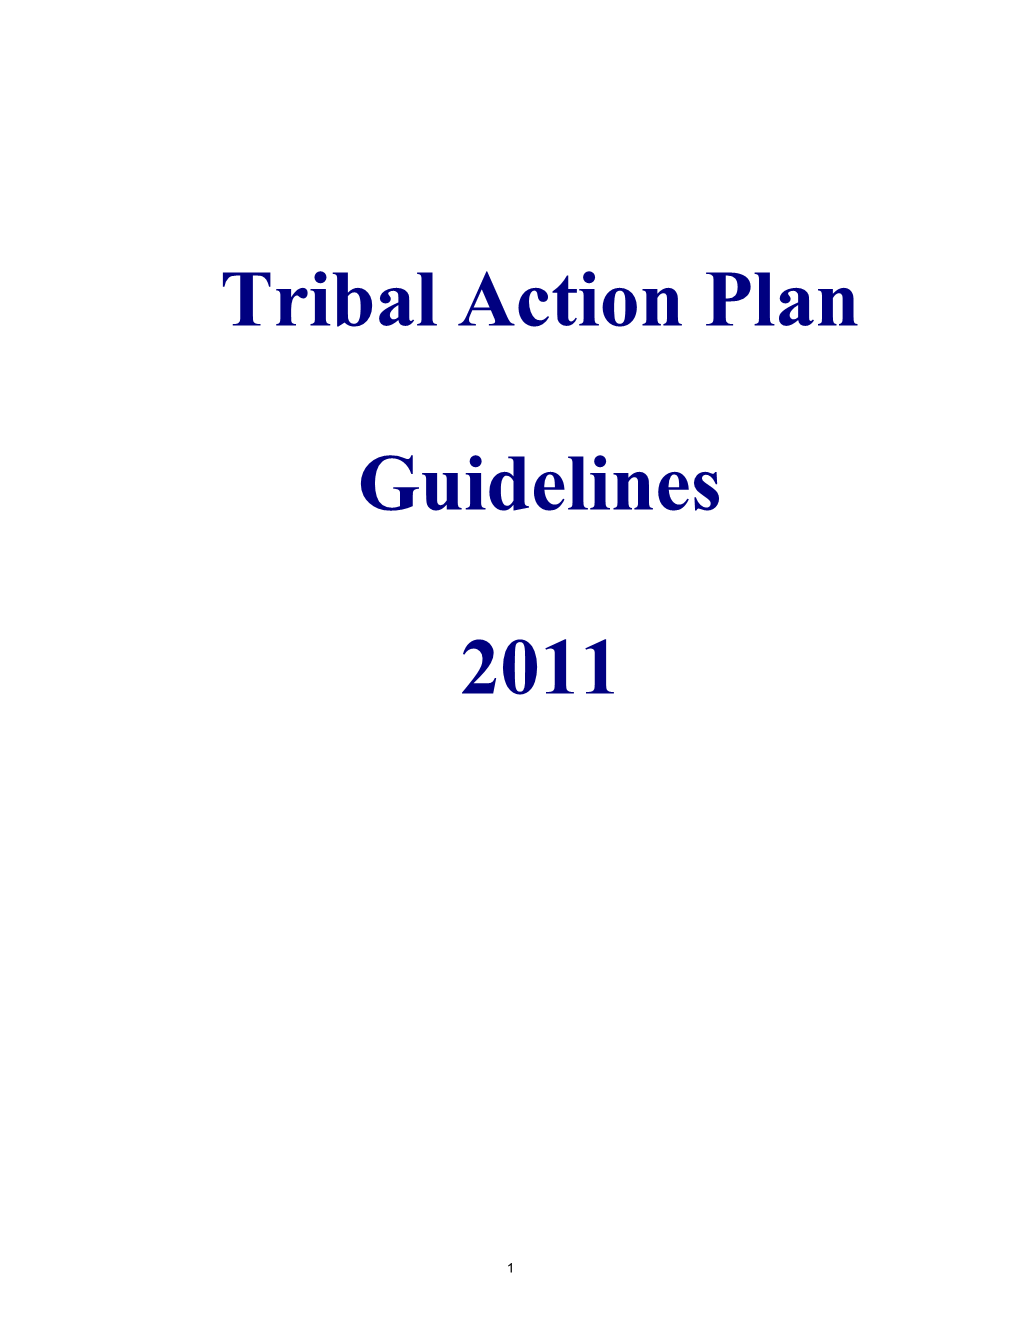 Tribal Action Plan Guidelines